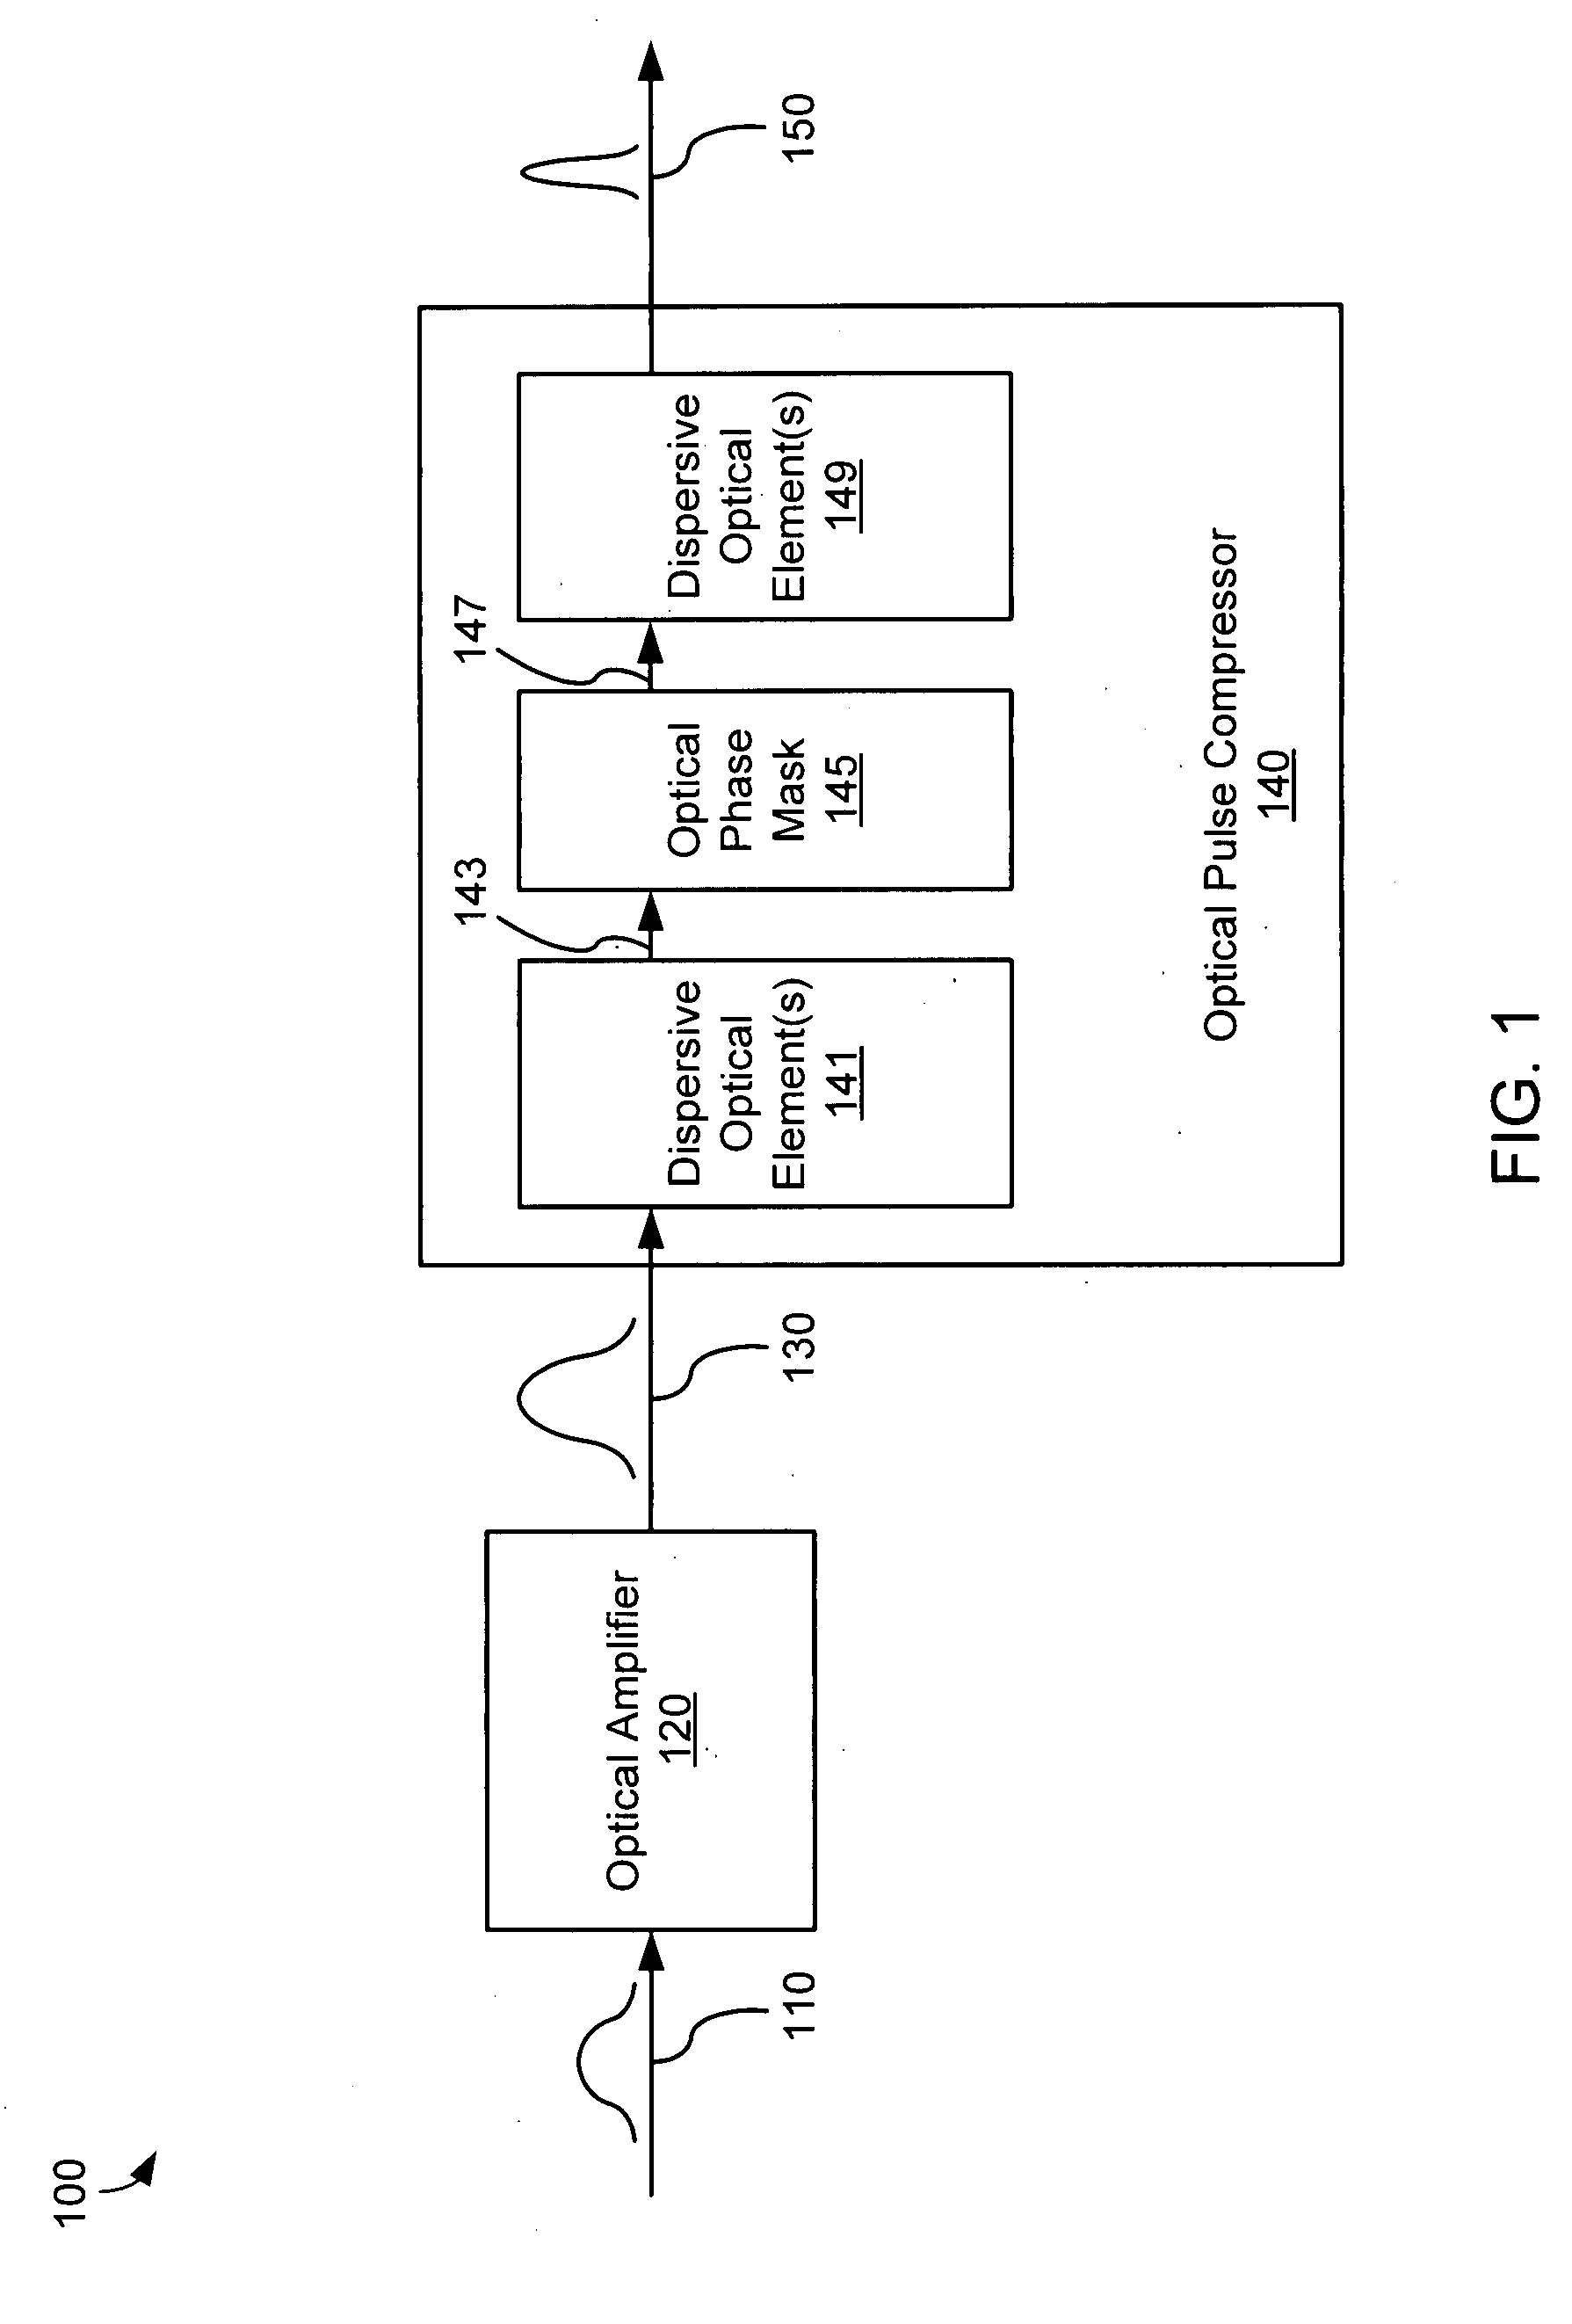 Static phase mask for high-order spectral phase control in a hybrid chirped pulse amplifier system